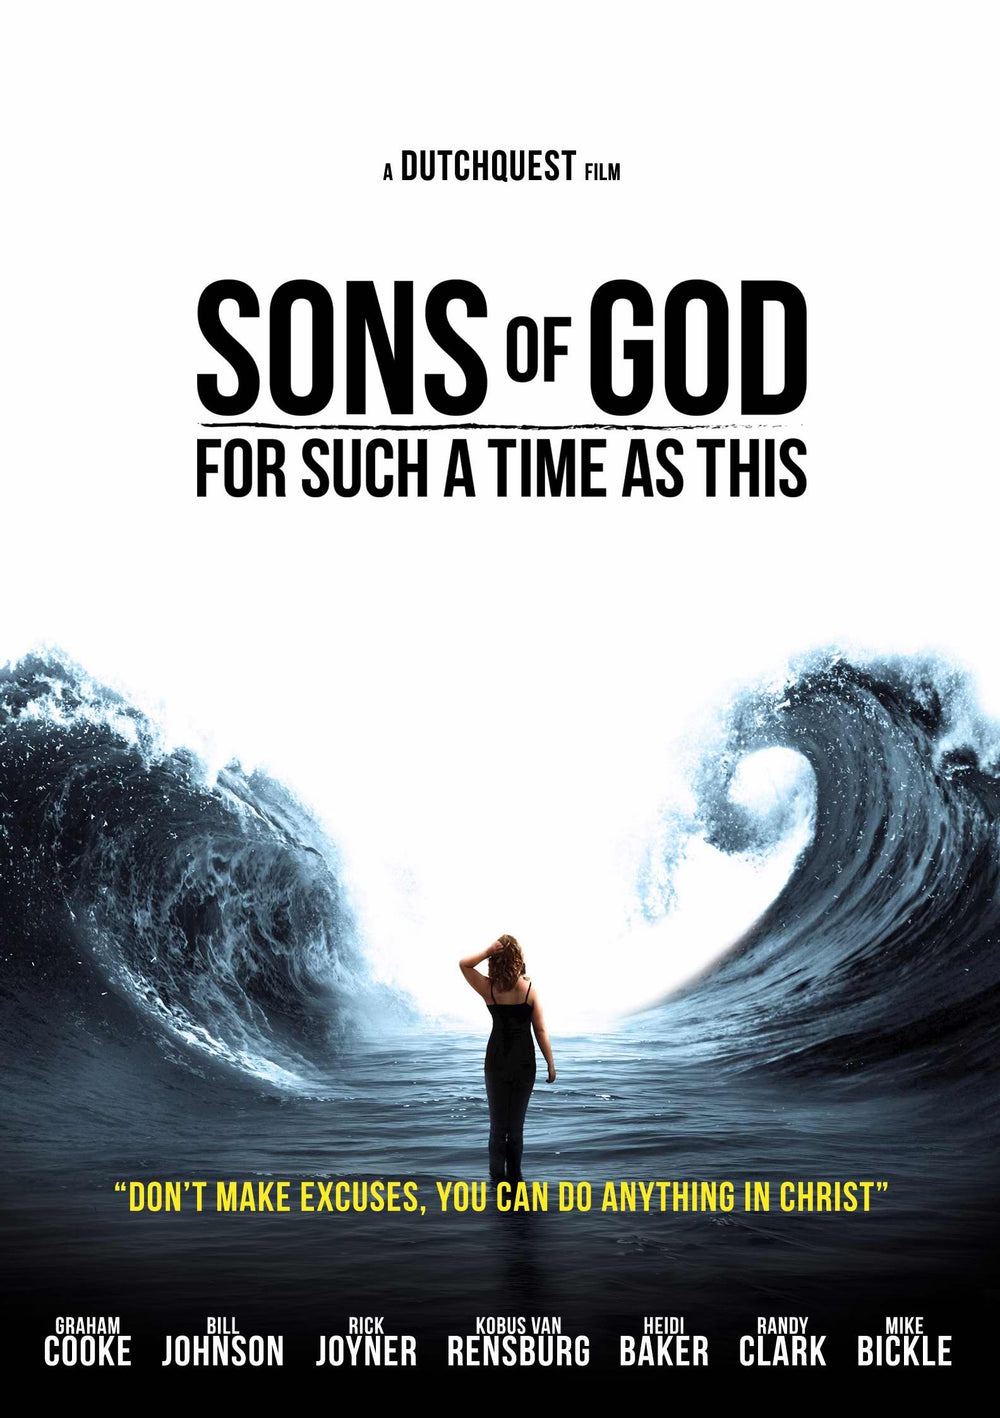 Sons Of God - Documentaire (DVD)